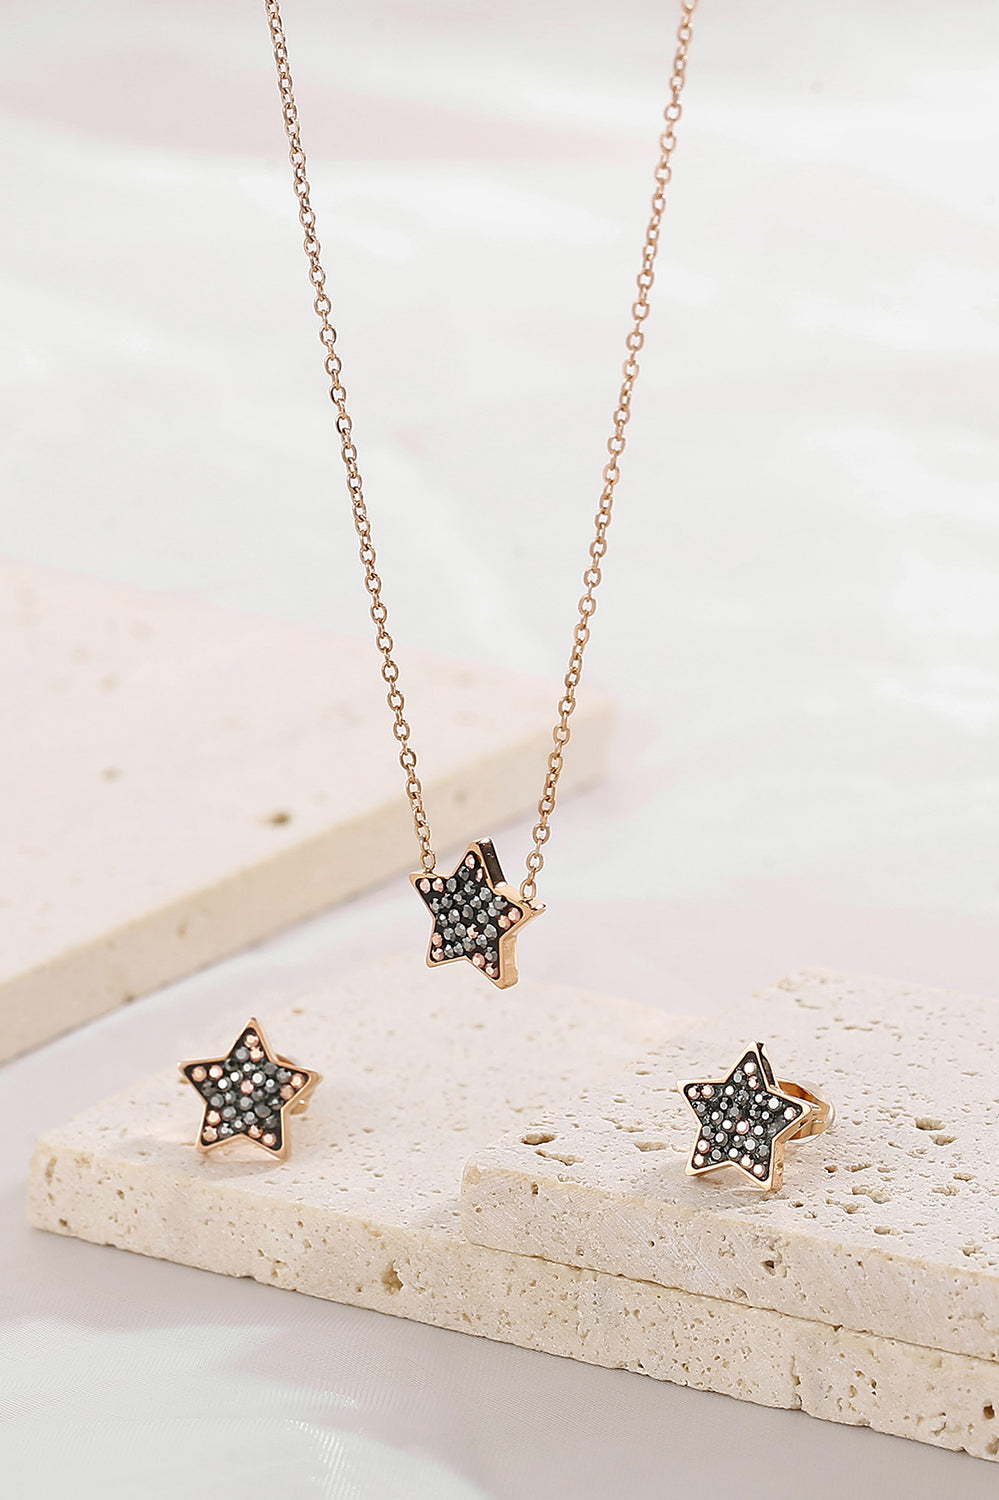 Star Necklace, Bracelet and Stud Earrings Jewelry Set Casual Chic Boutique